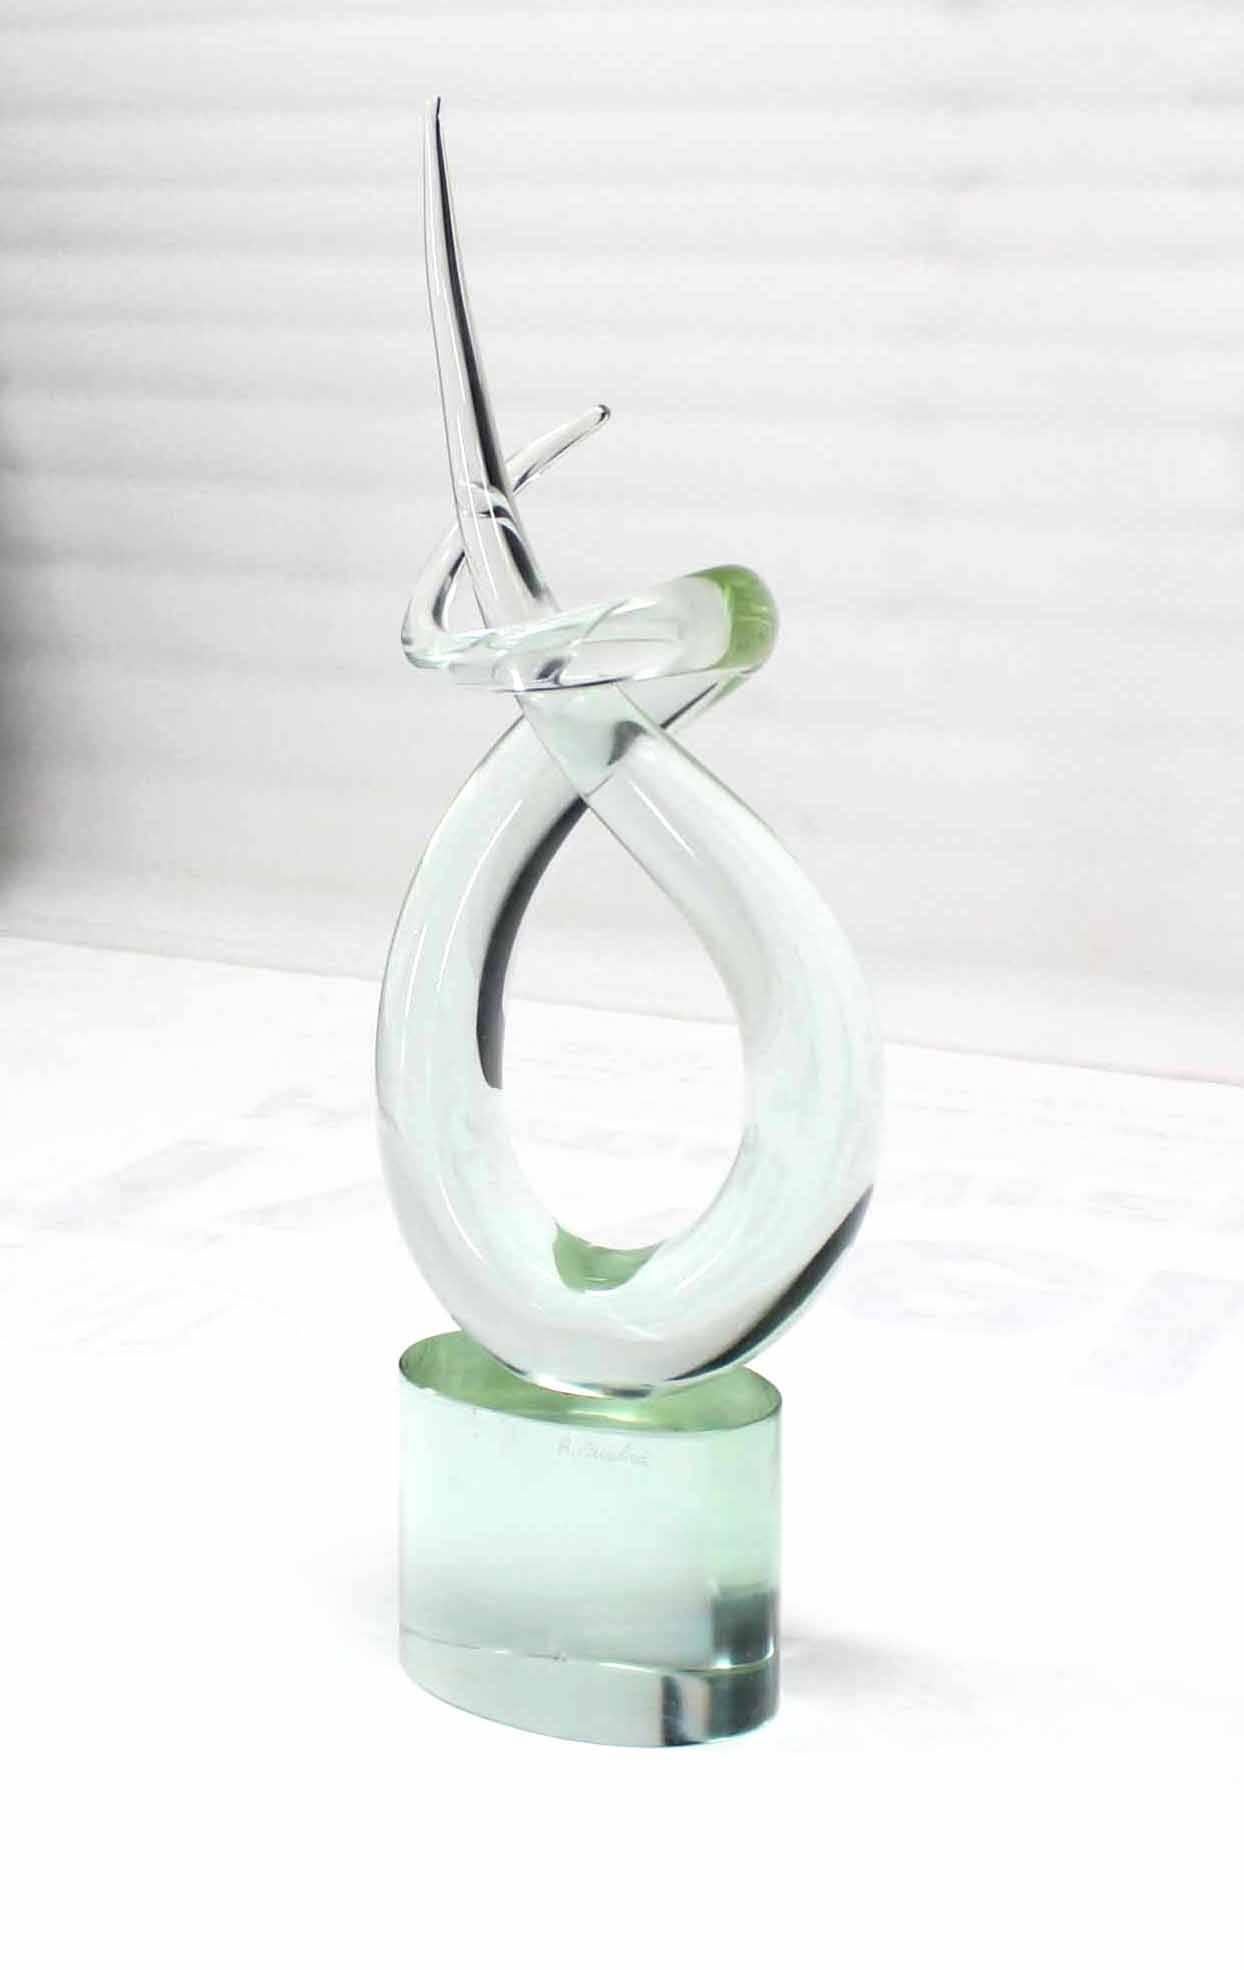 Very nice twisted horns motif pale green glass abstract sculpture on heavy oval glass base.